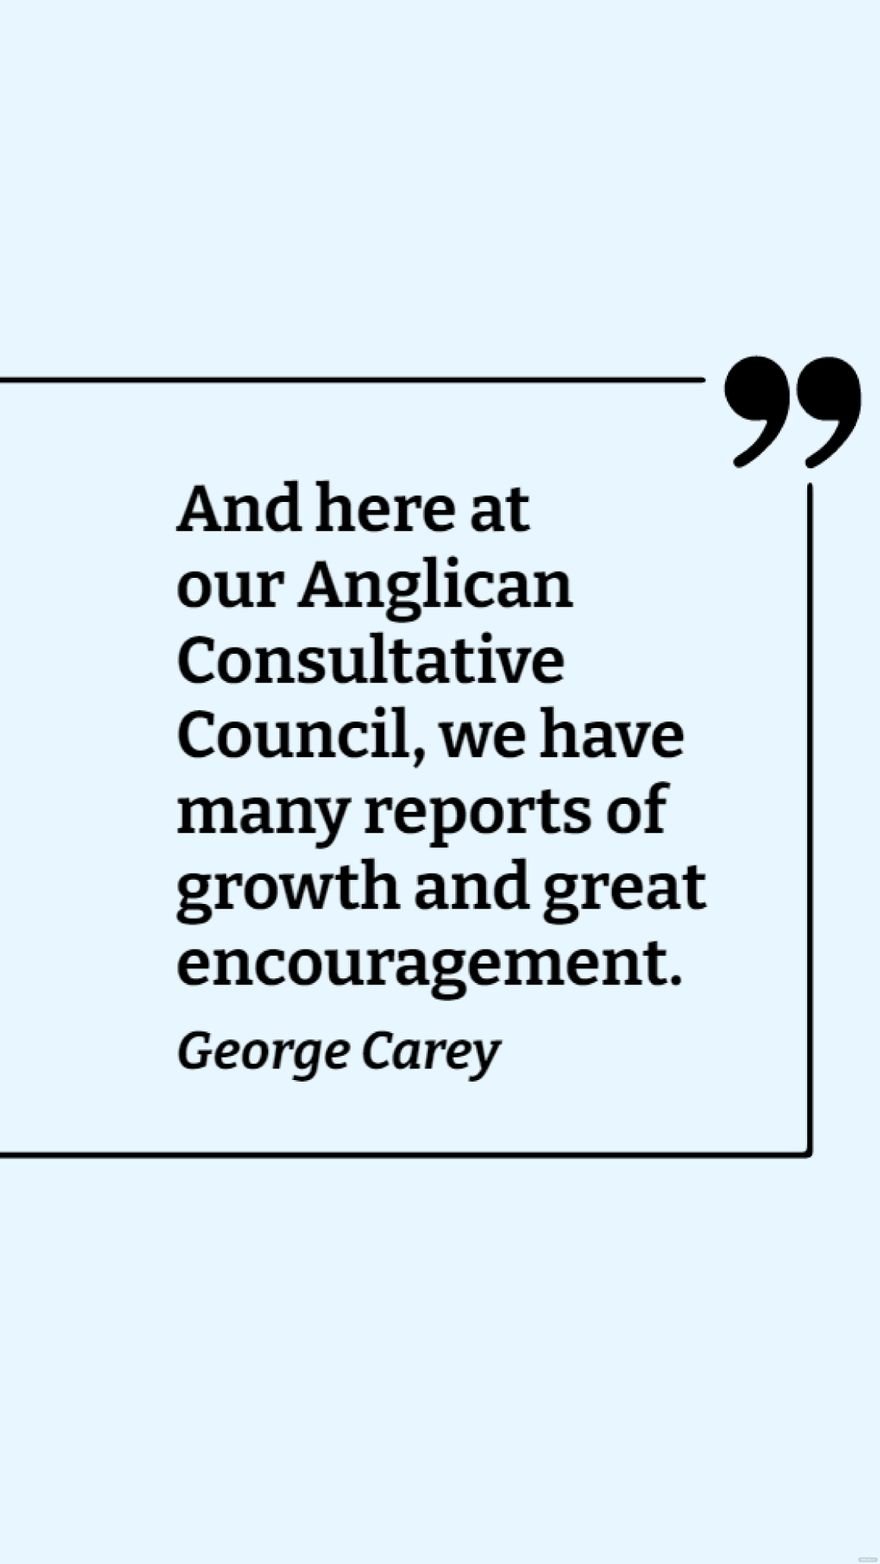 George Carey - And here at our Anglican Consultative Council, we have many reports of growth and great encouragement.